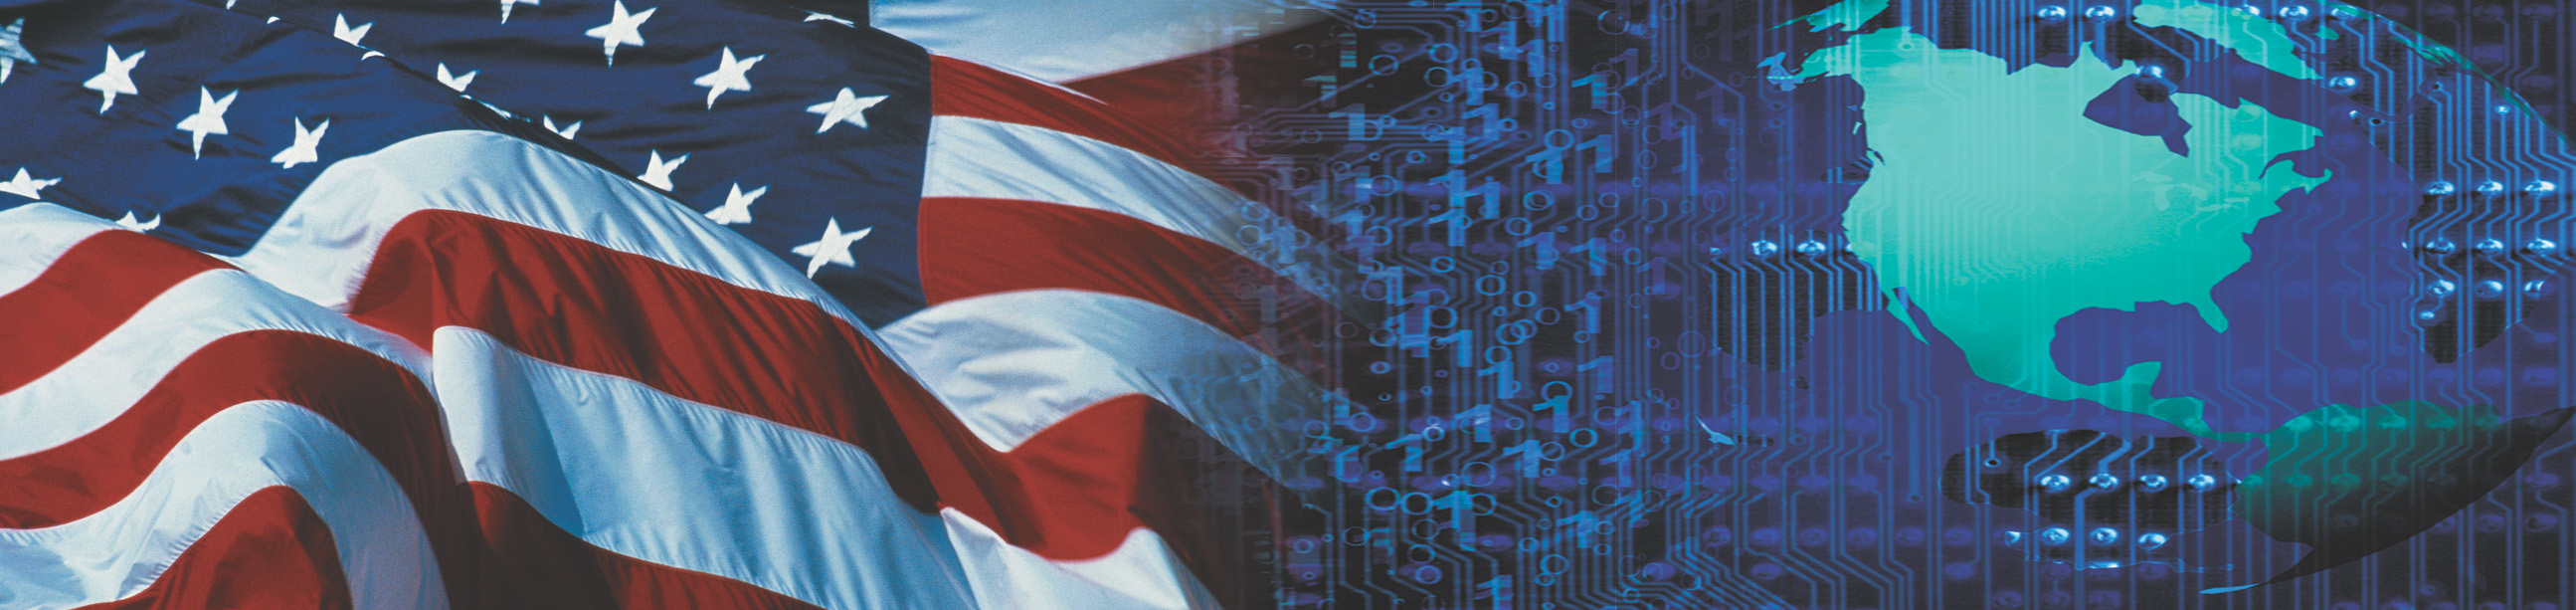 Banner: an American flag billows next to images of computer circuitry and the earth.